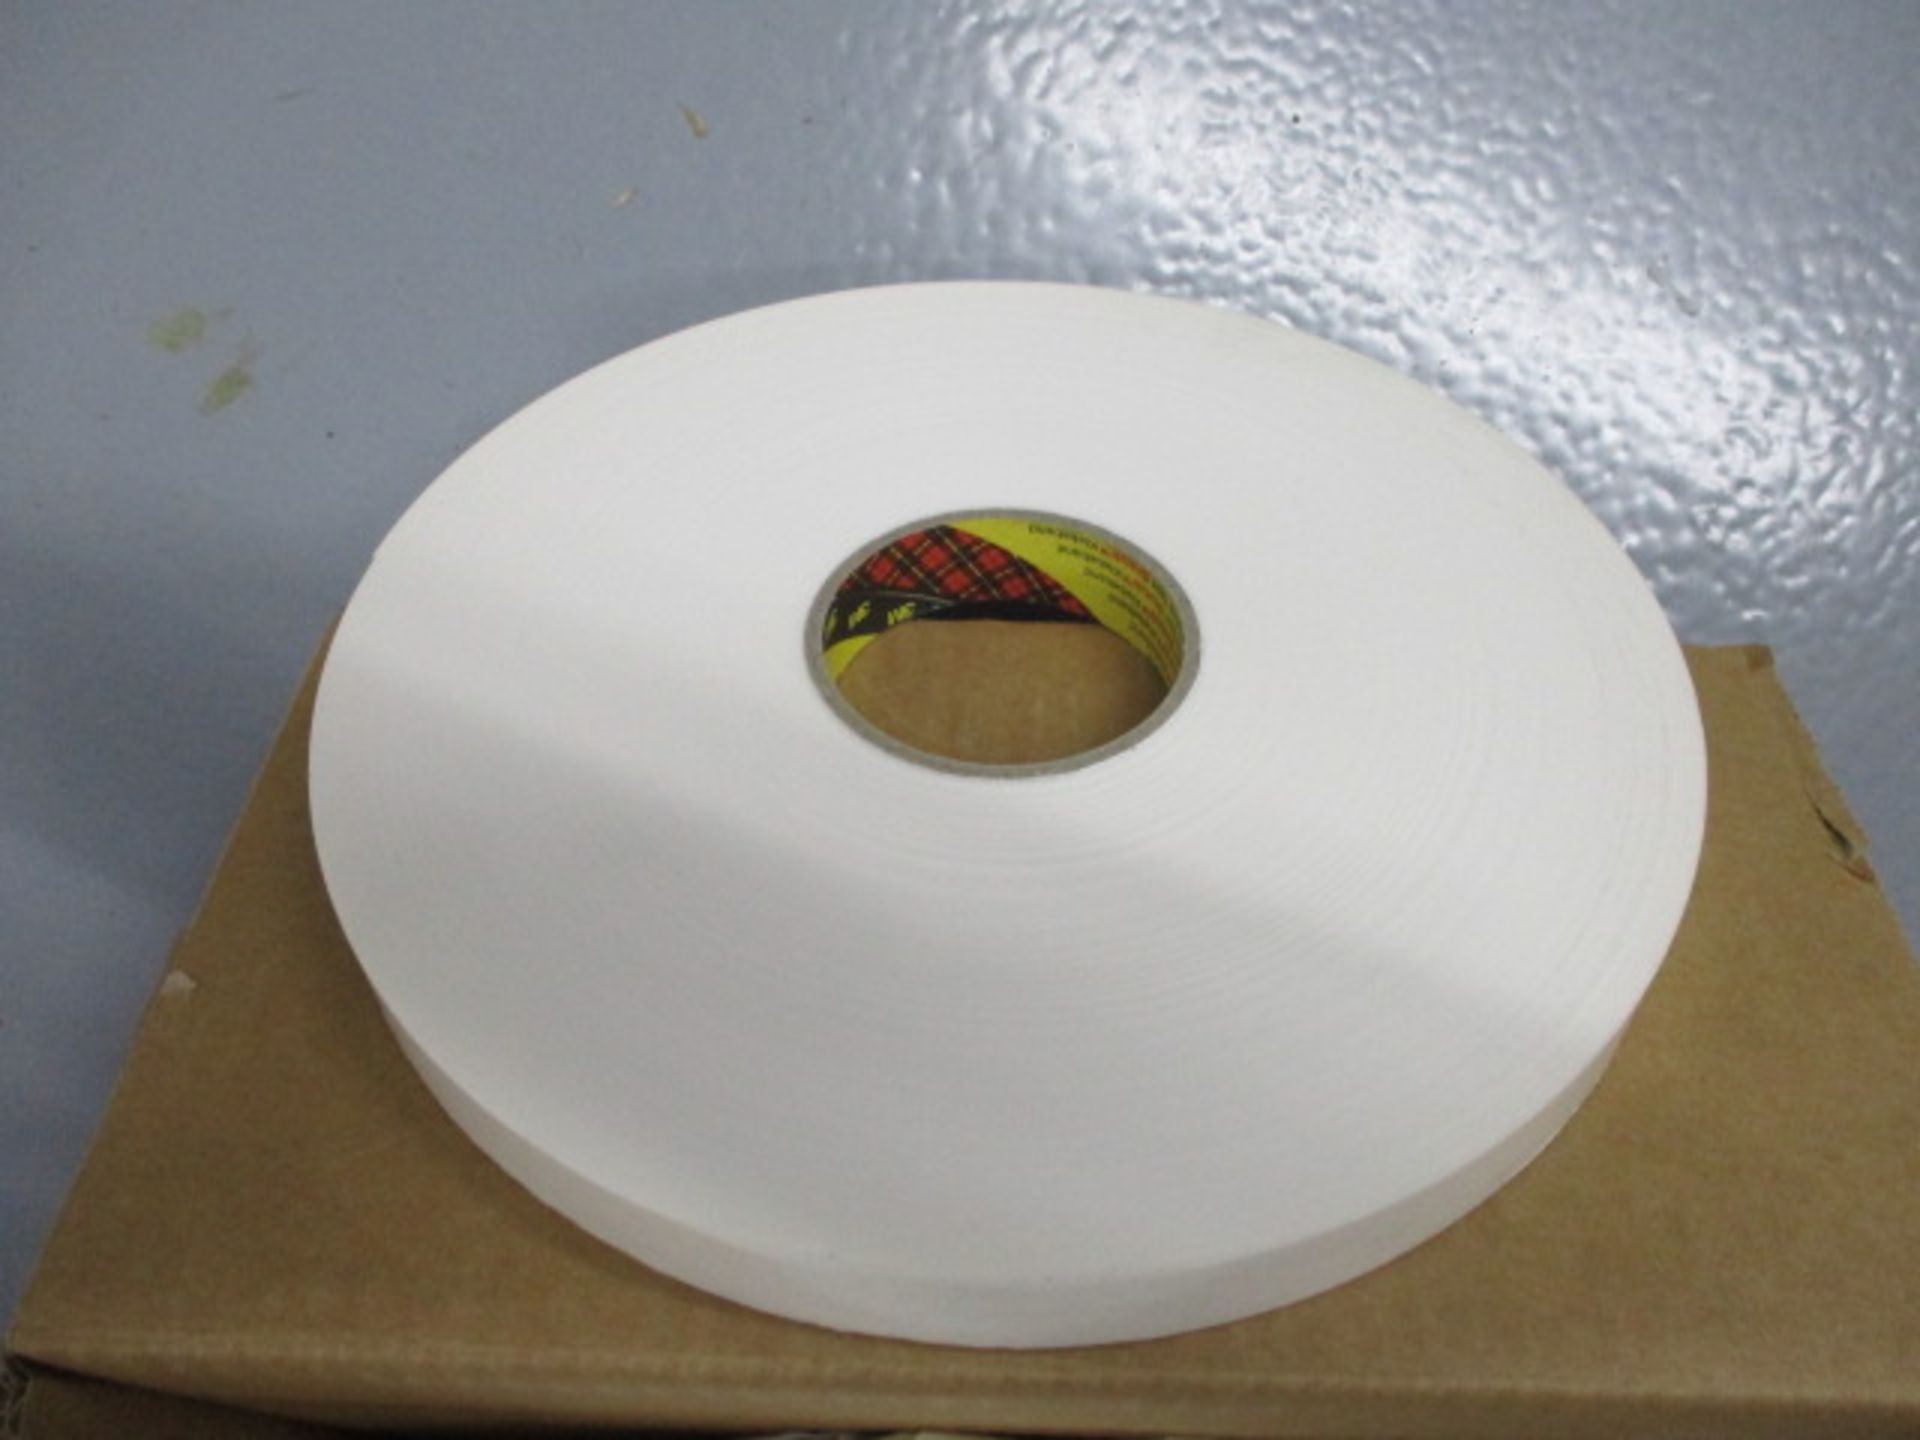 Industrial tape - Image 10 of 10